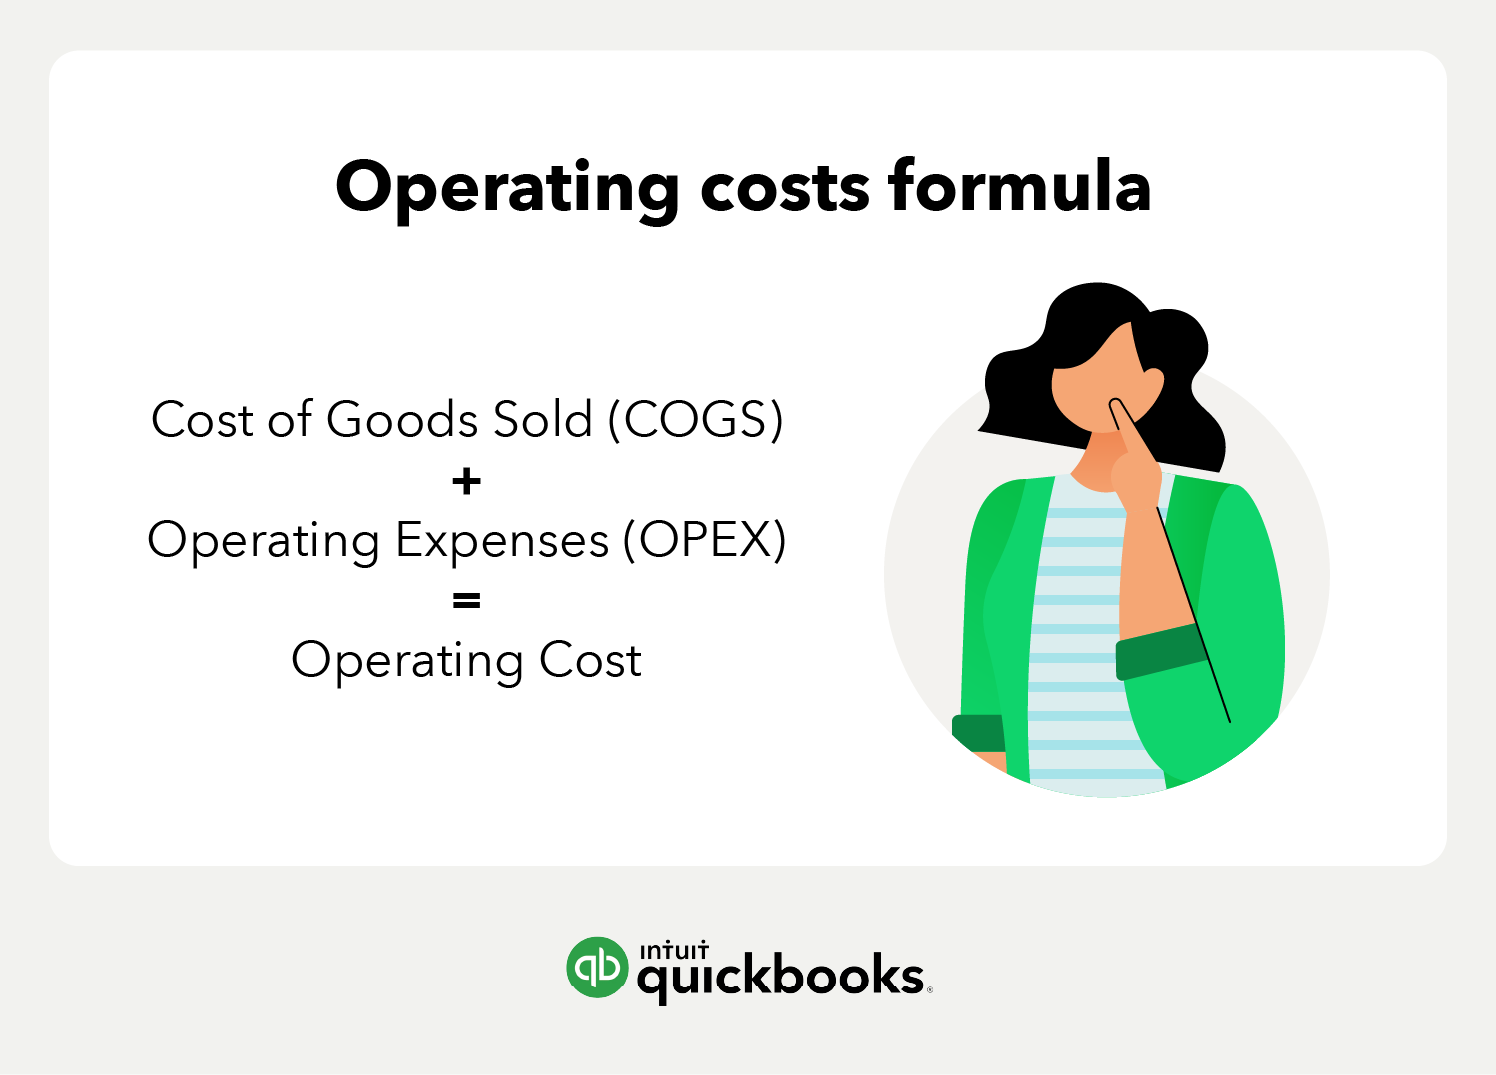 Operating costs formula. Cost of Goods Sold (COGS) + Operating Expenses (OPEX) = Operating Cost